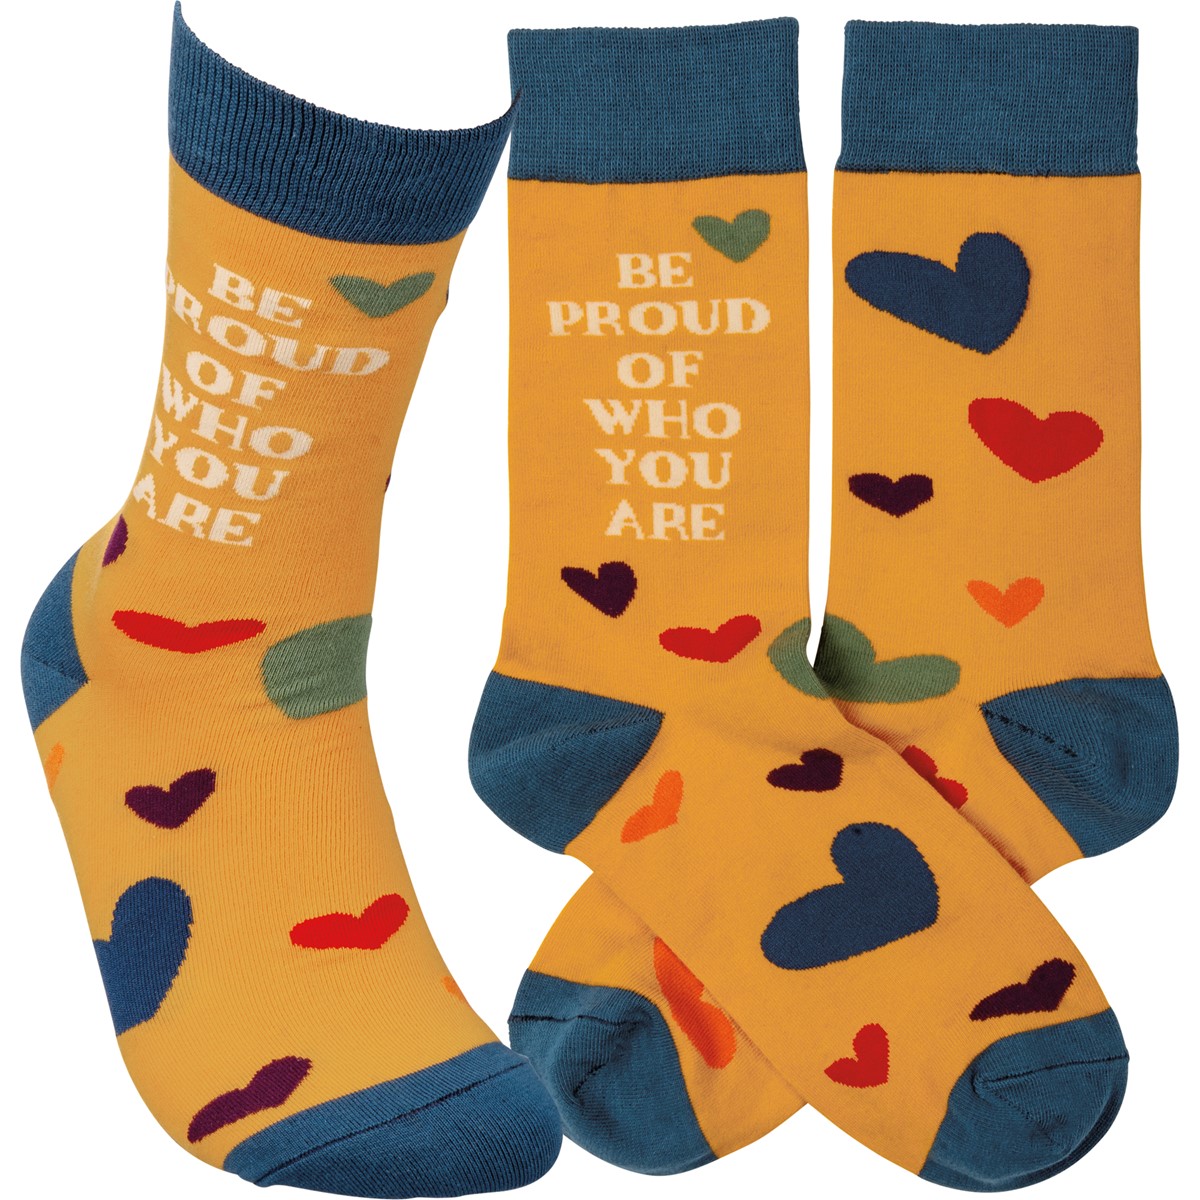 Socks - Be Proud Of Who You Are - One Size Fits Most - Cotton, Nylon, Spandex